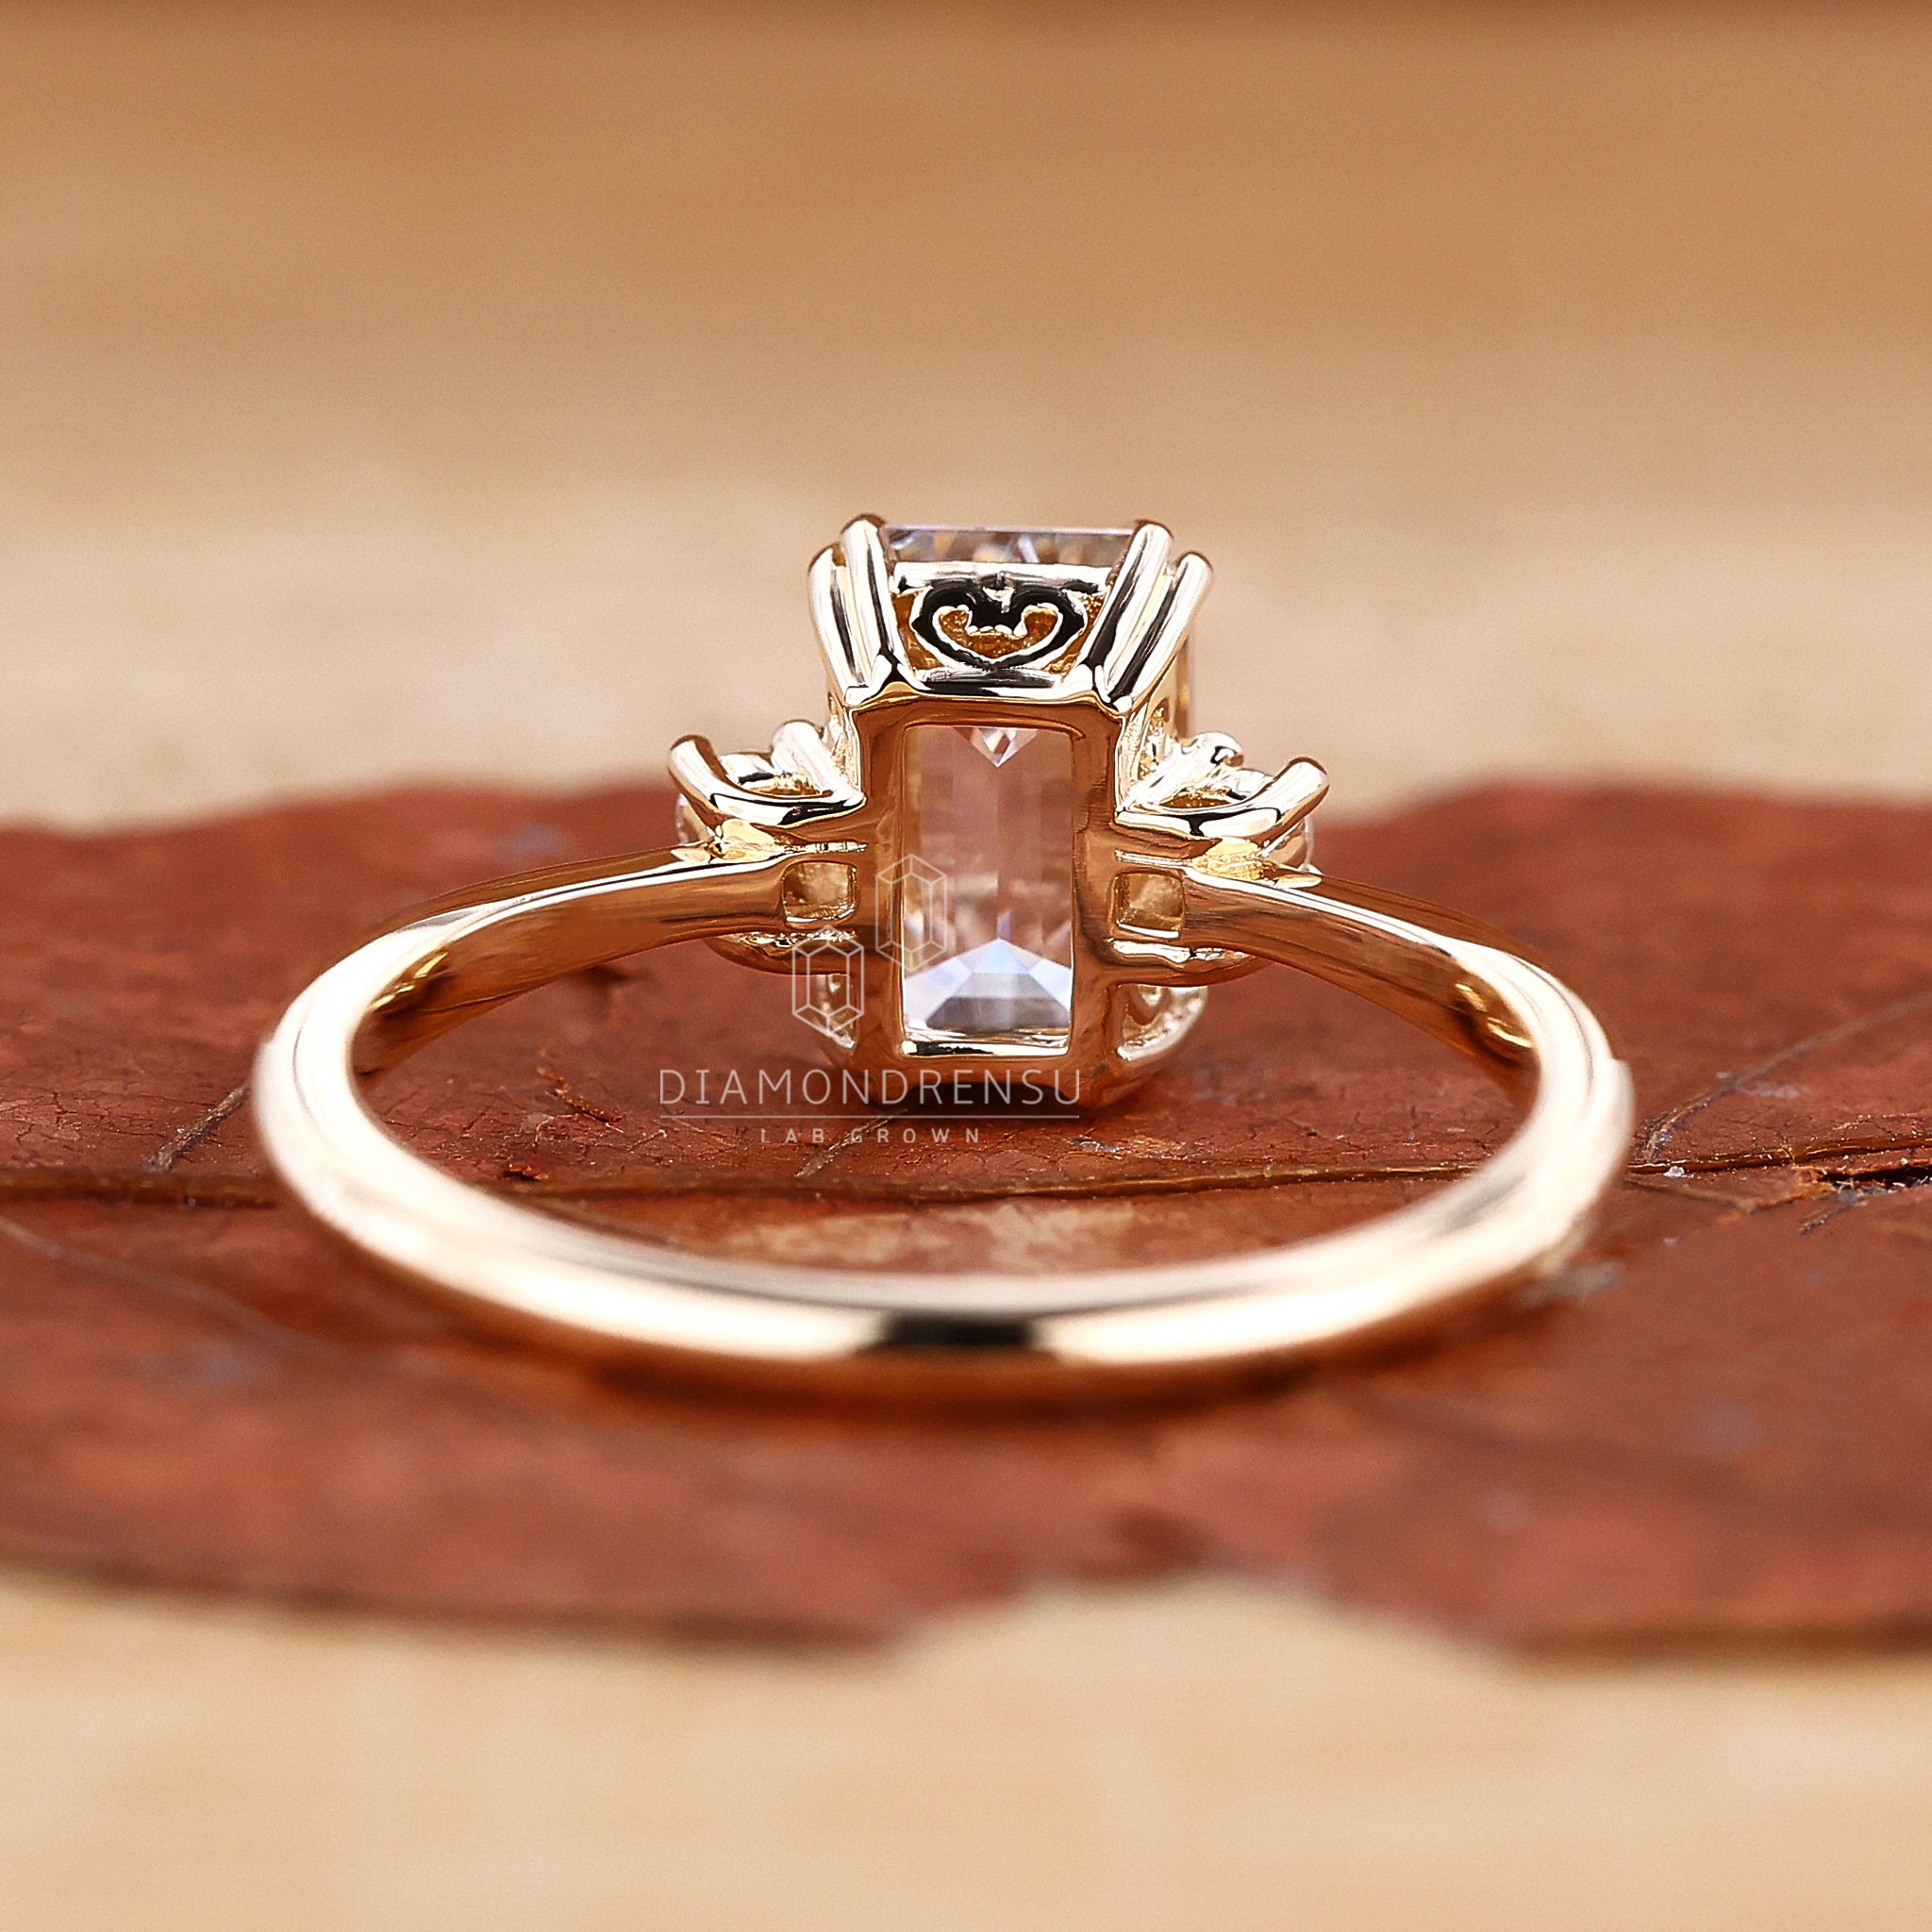 Detailed view of an emerald cut diamond in a classic three stone ring setting